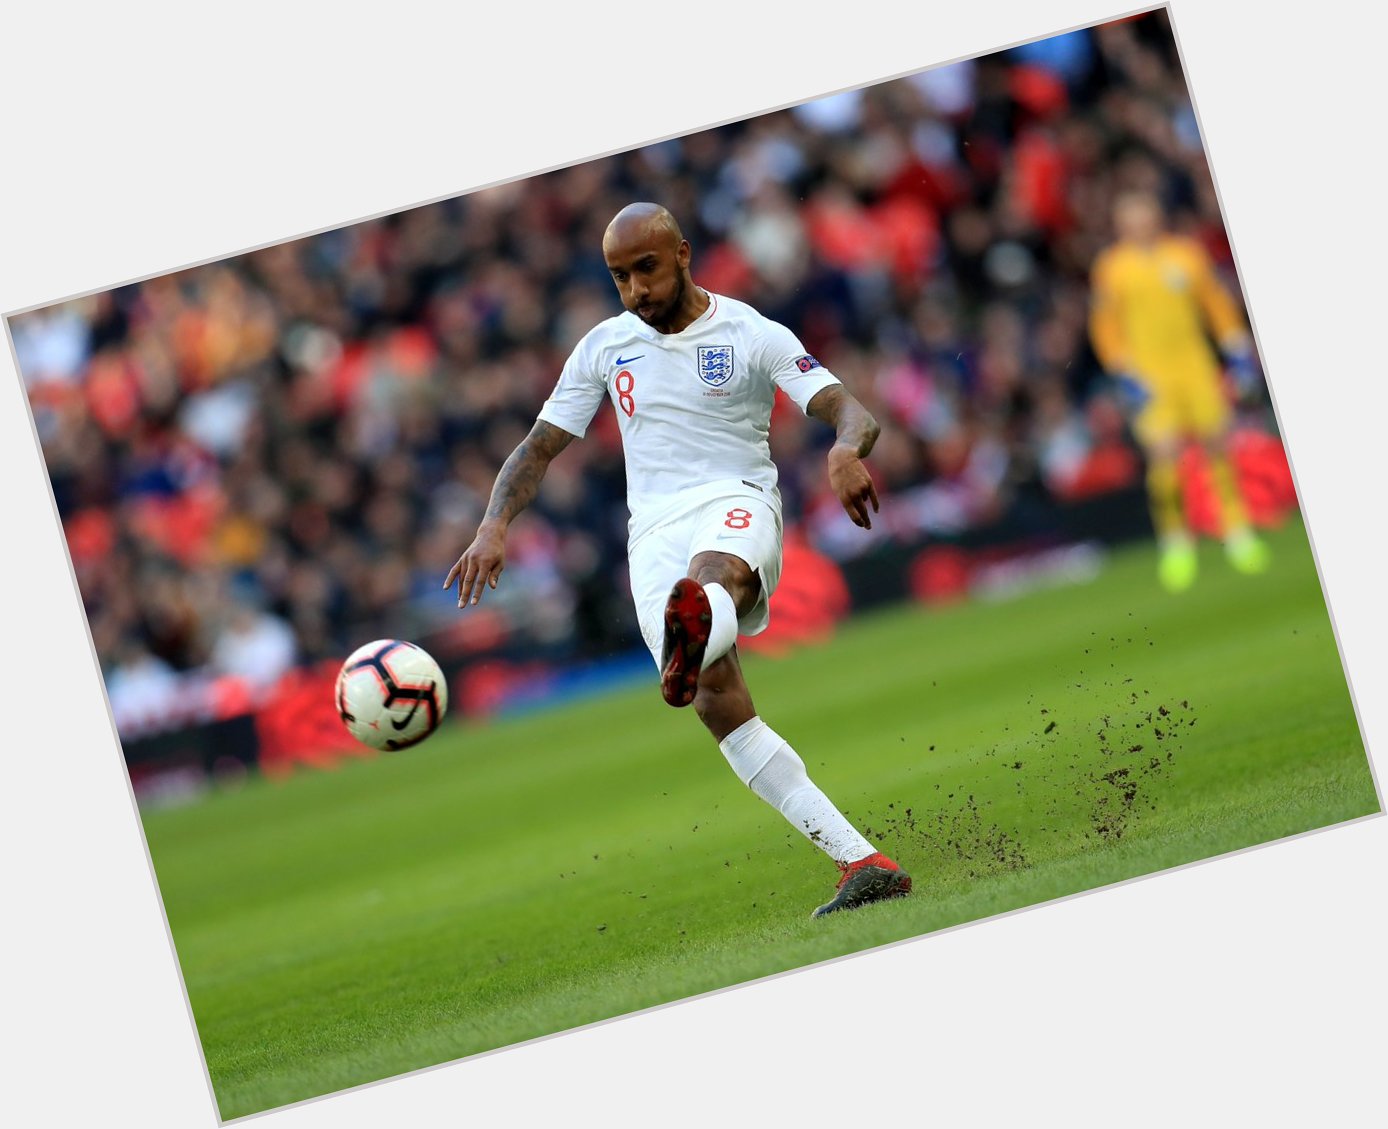 Happy birthday to Fabian Delph. The Manchester City and England legend turns 29 today.

Have a good one, Delphy.  